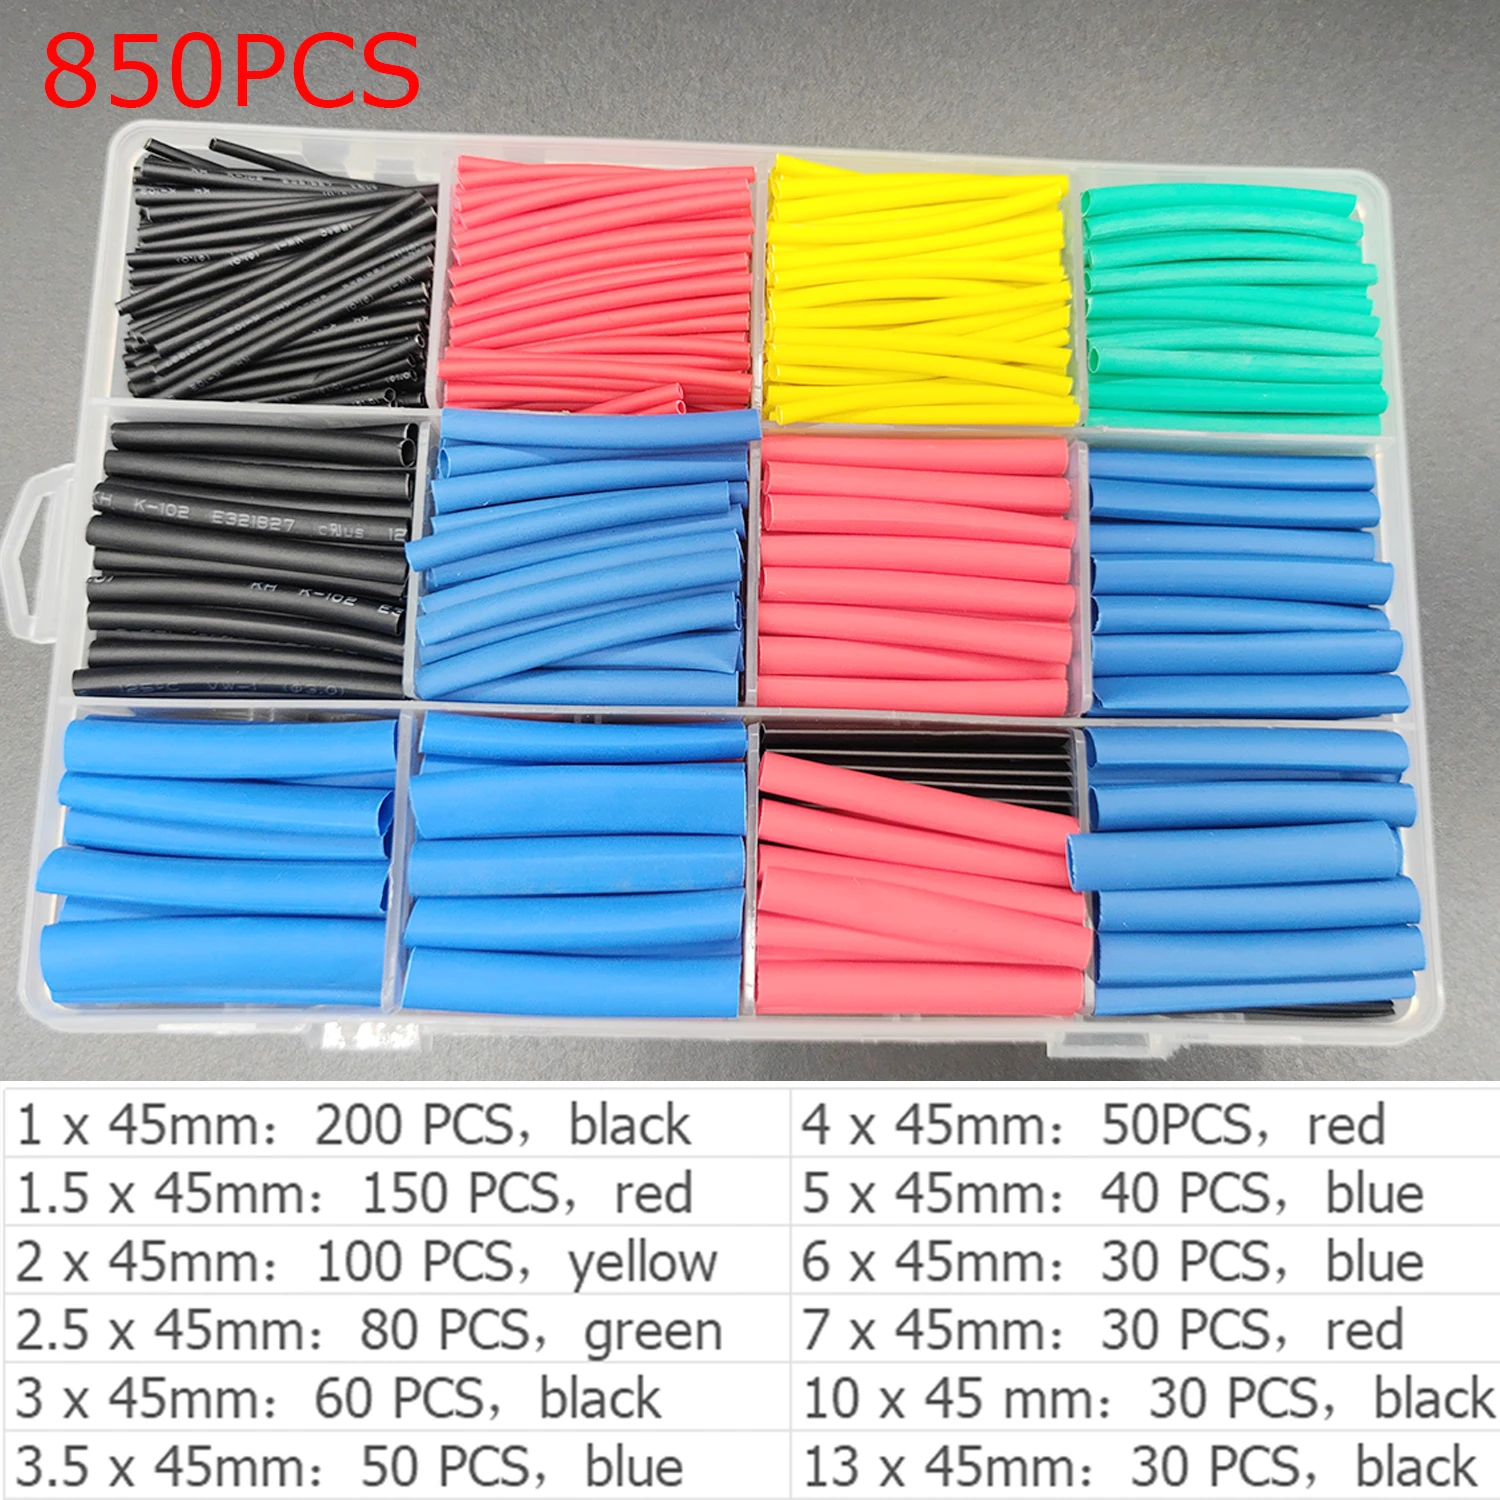 

NEWE 850pcs/656pcs Thermoresistant tube heat shrink tubing Insulation Sleeving Polyolefin 2:1 Shrink wrapping Assorted box kit